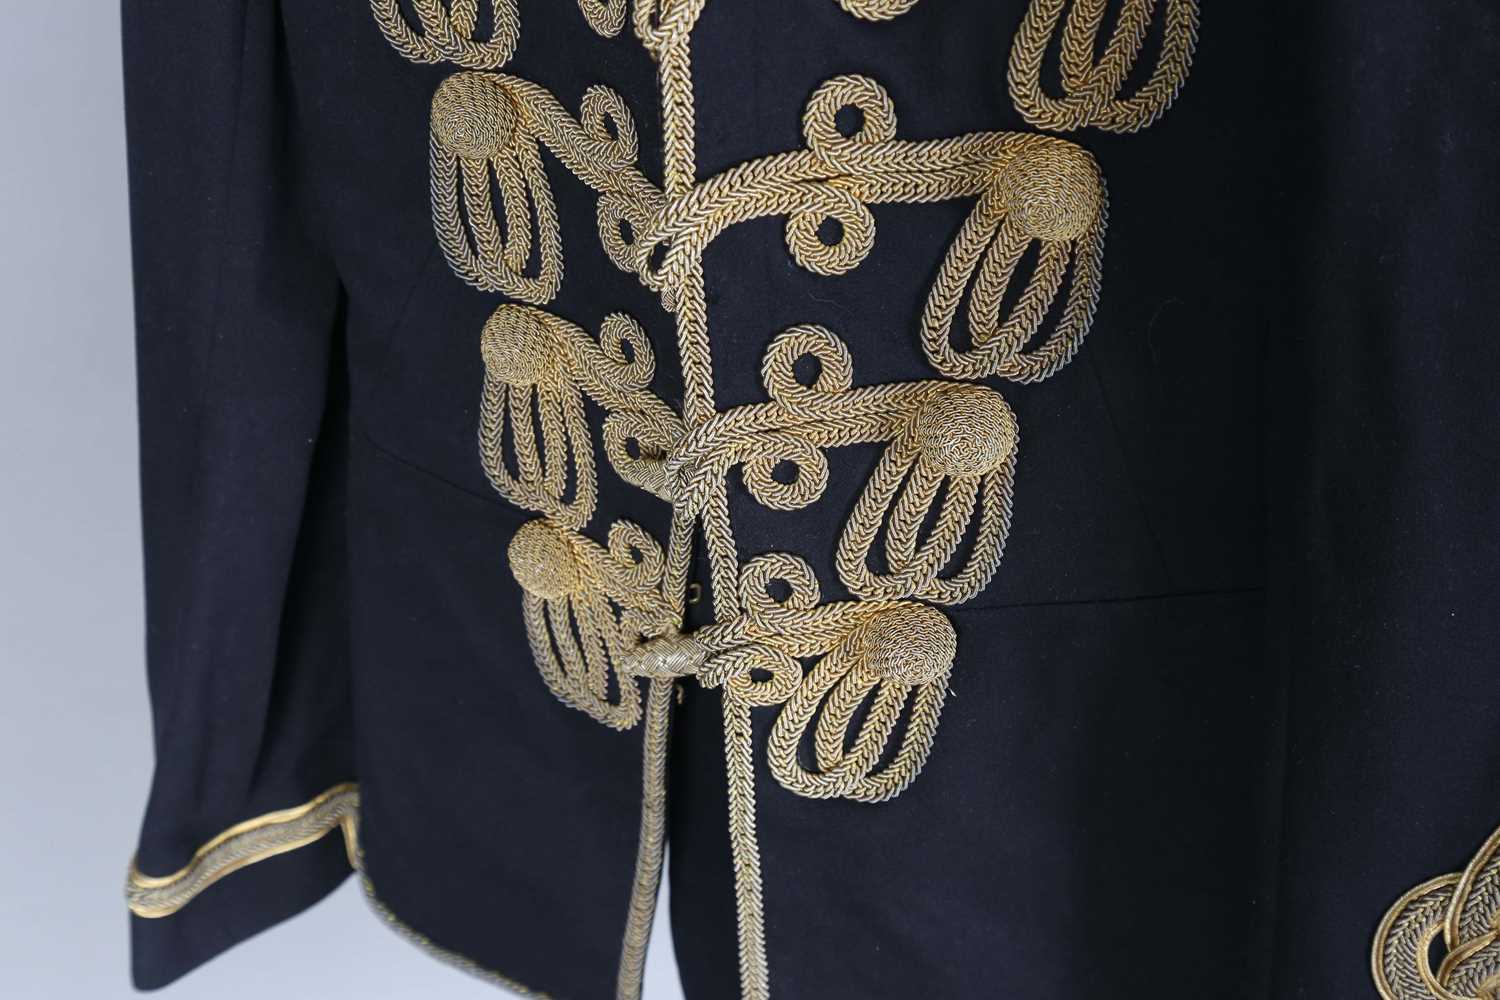 A group of early 20th century officer's dress tunics with bullion-embroidered decoration and rank - Image 17 of 23